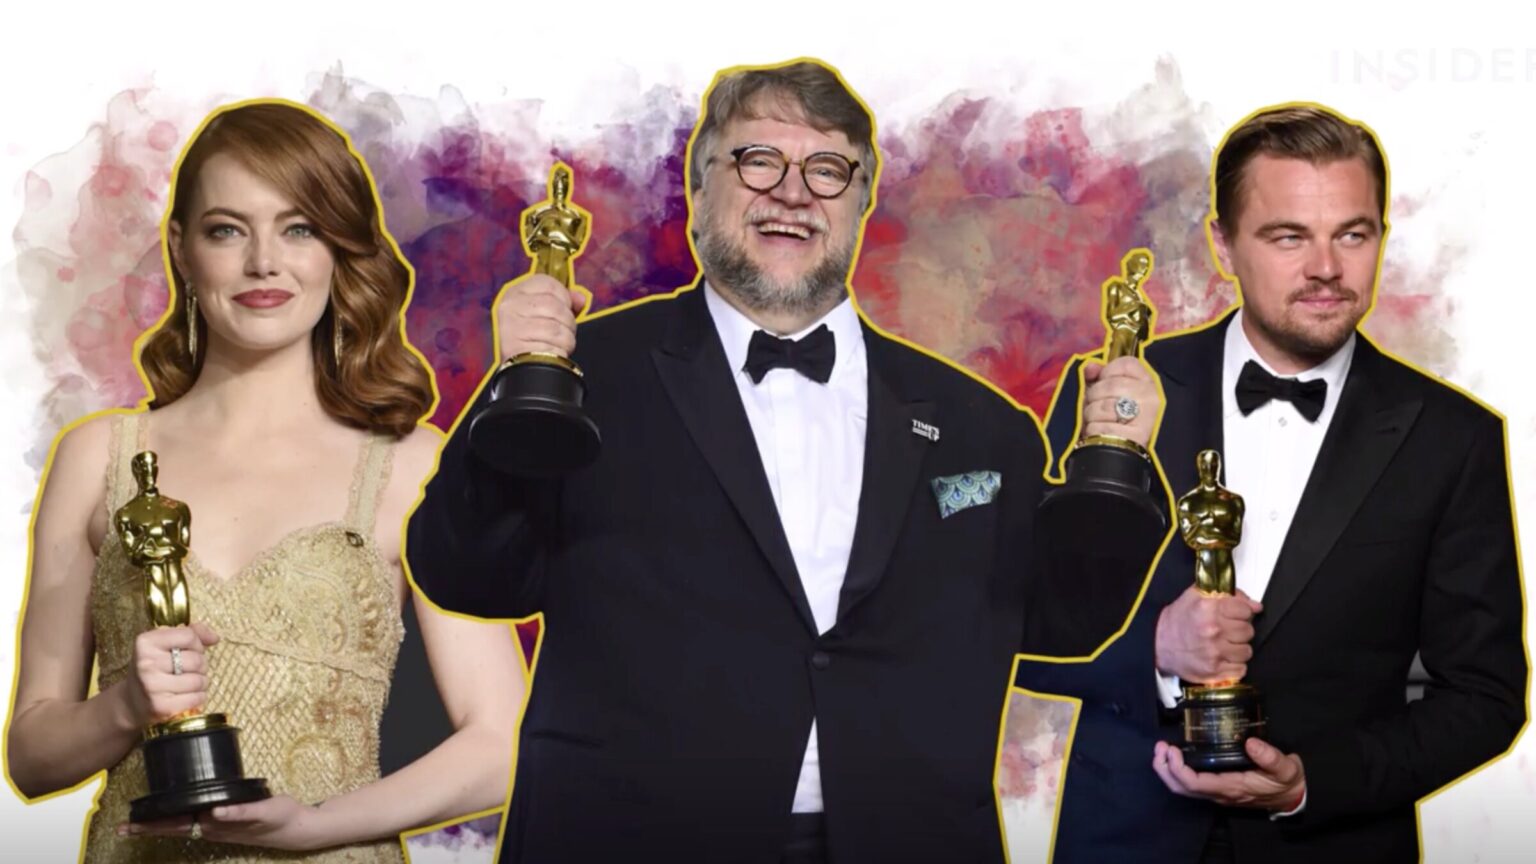 Well, the votes are in – the 2021 Academy awards will be postponed. The Oscars is riddled with problems and here's why it should be cancelled.